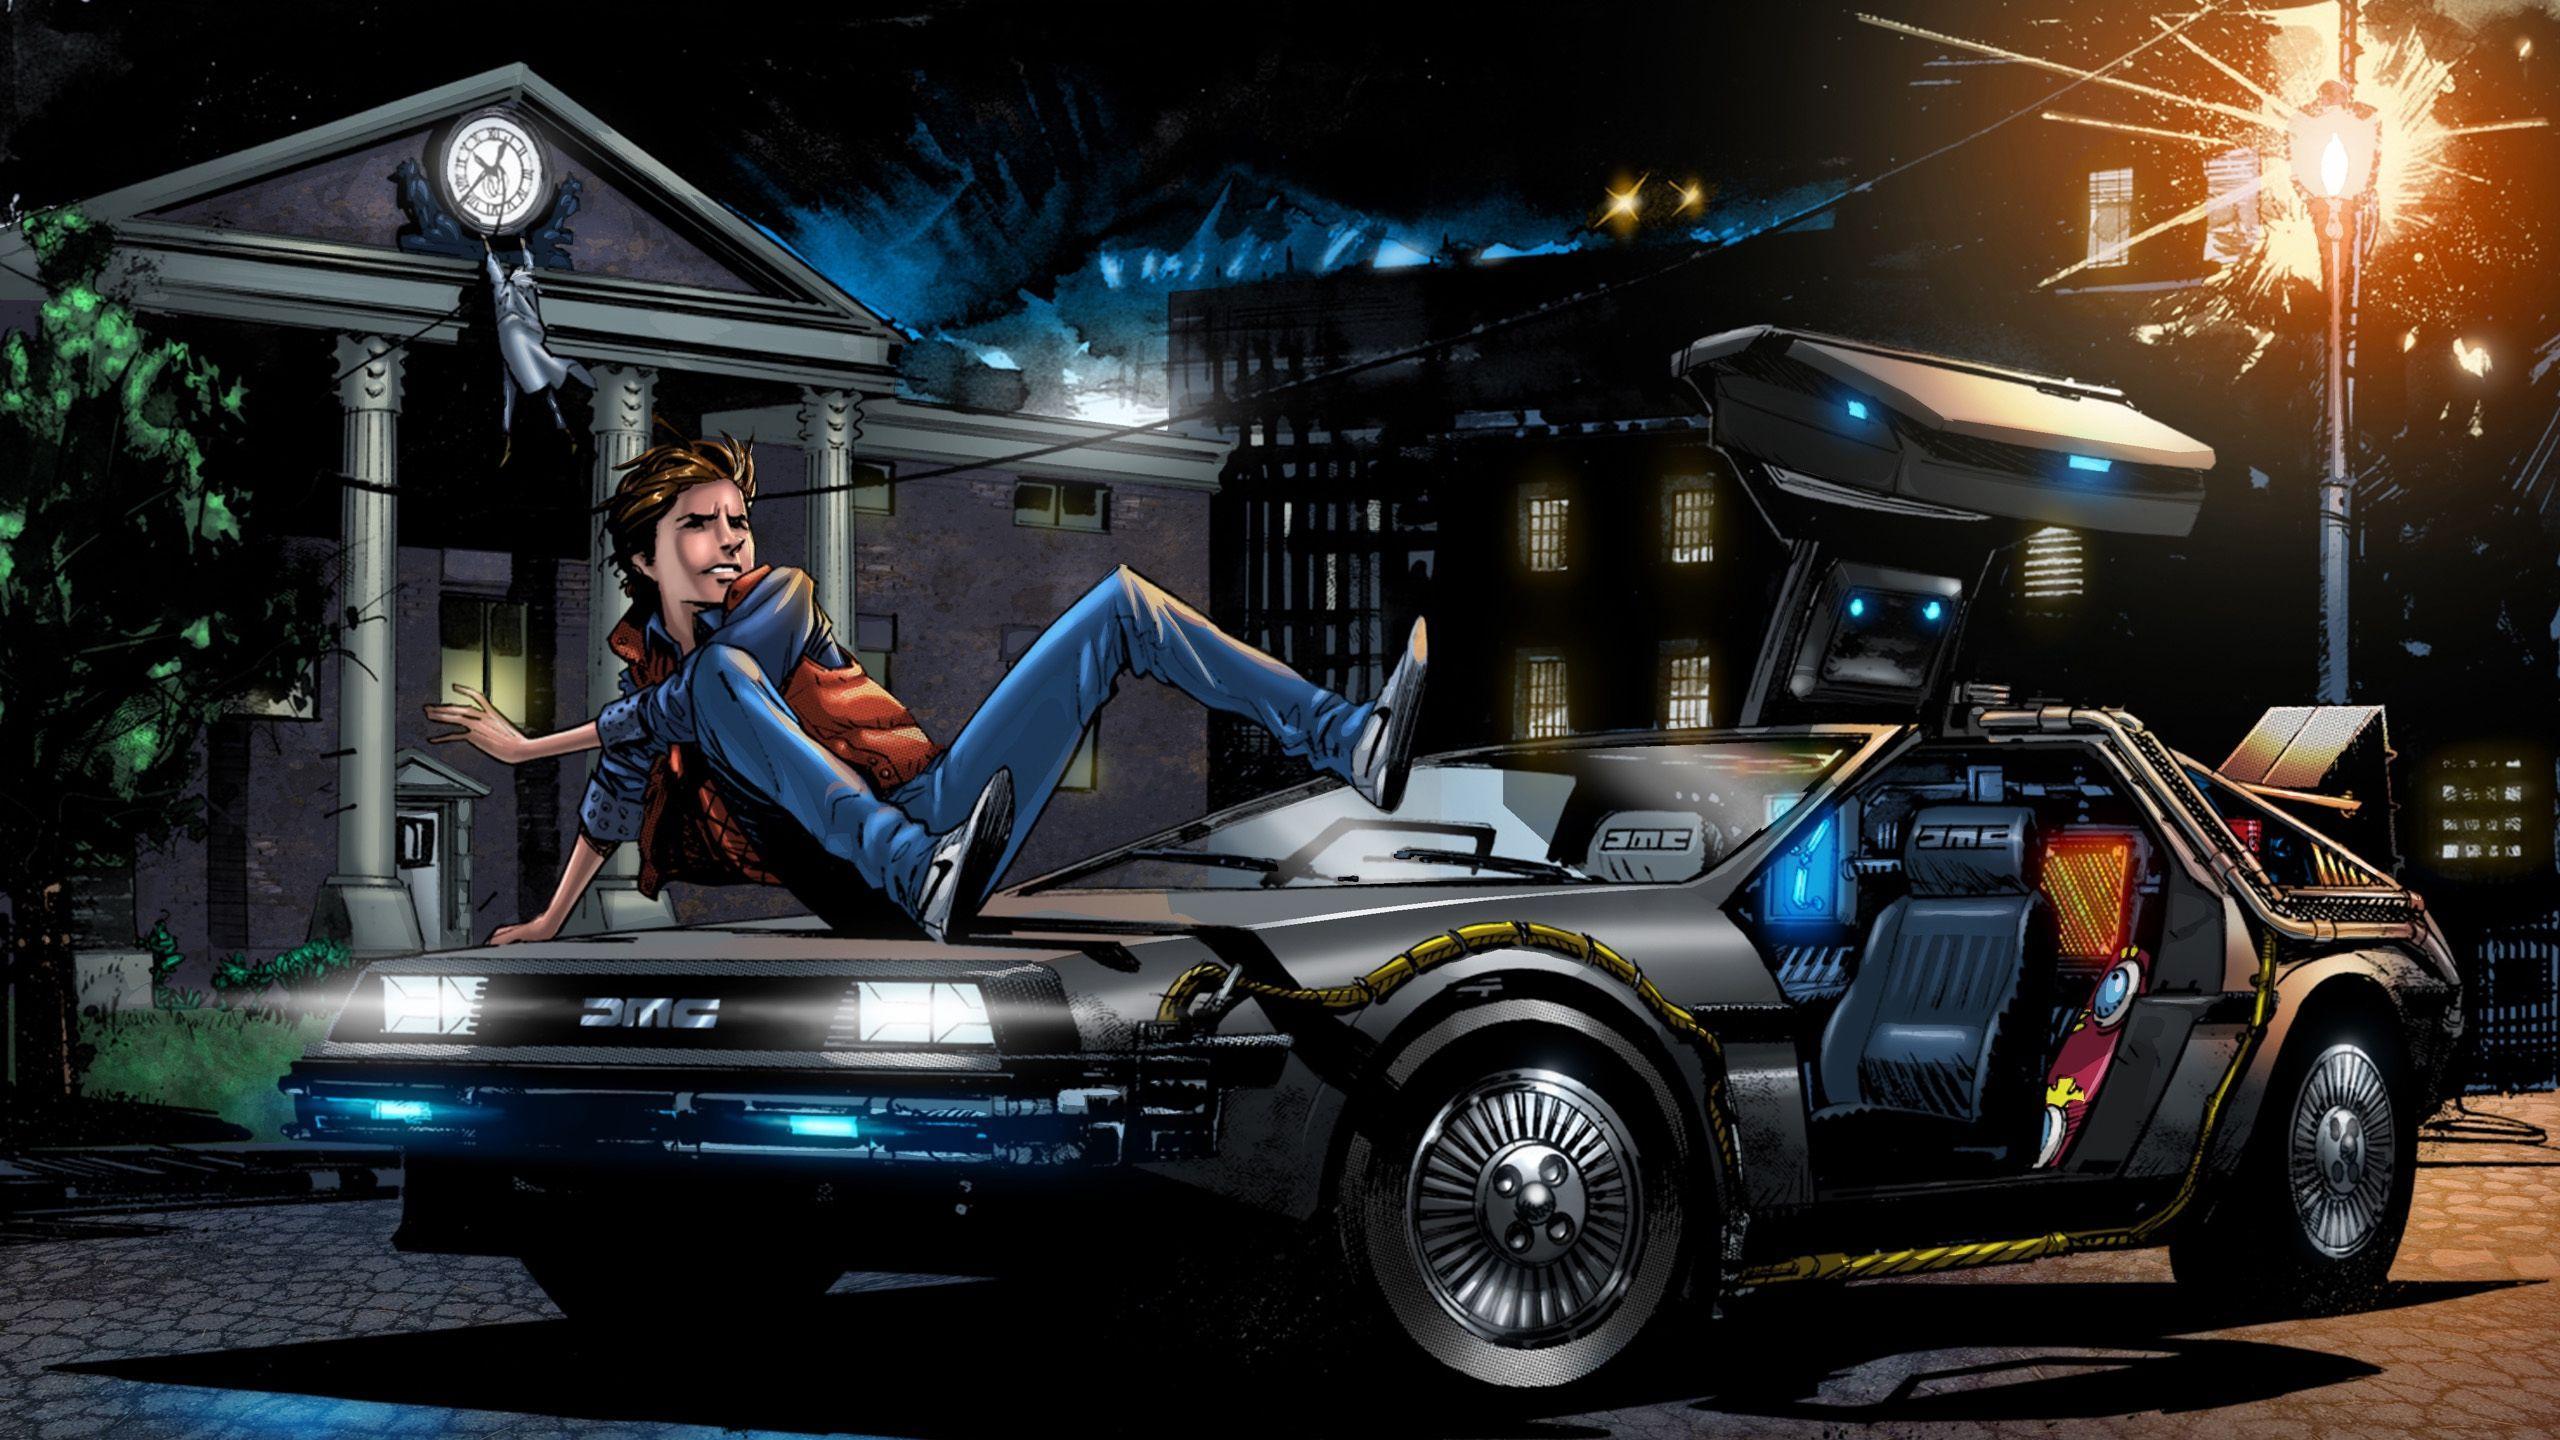 Back to the Future 2 Wallpapers Top Free Back to the Future 2